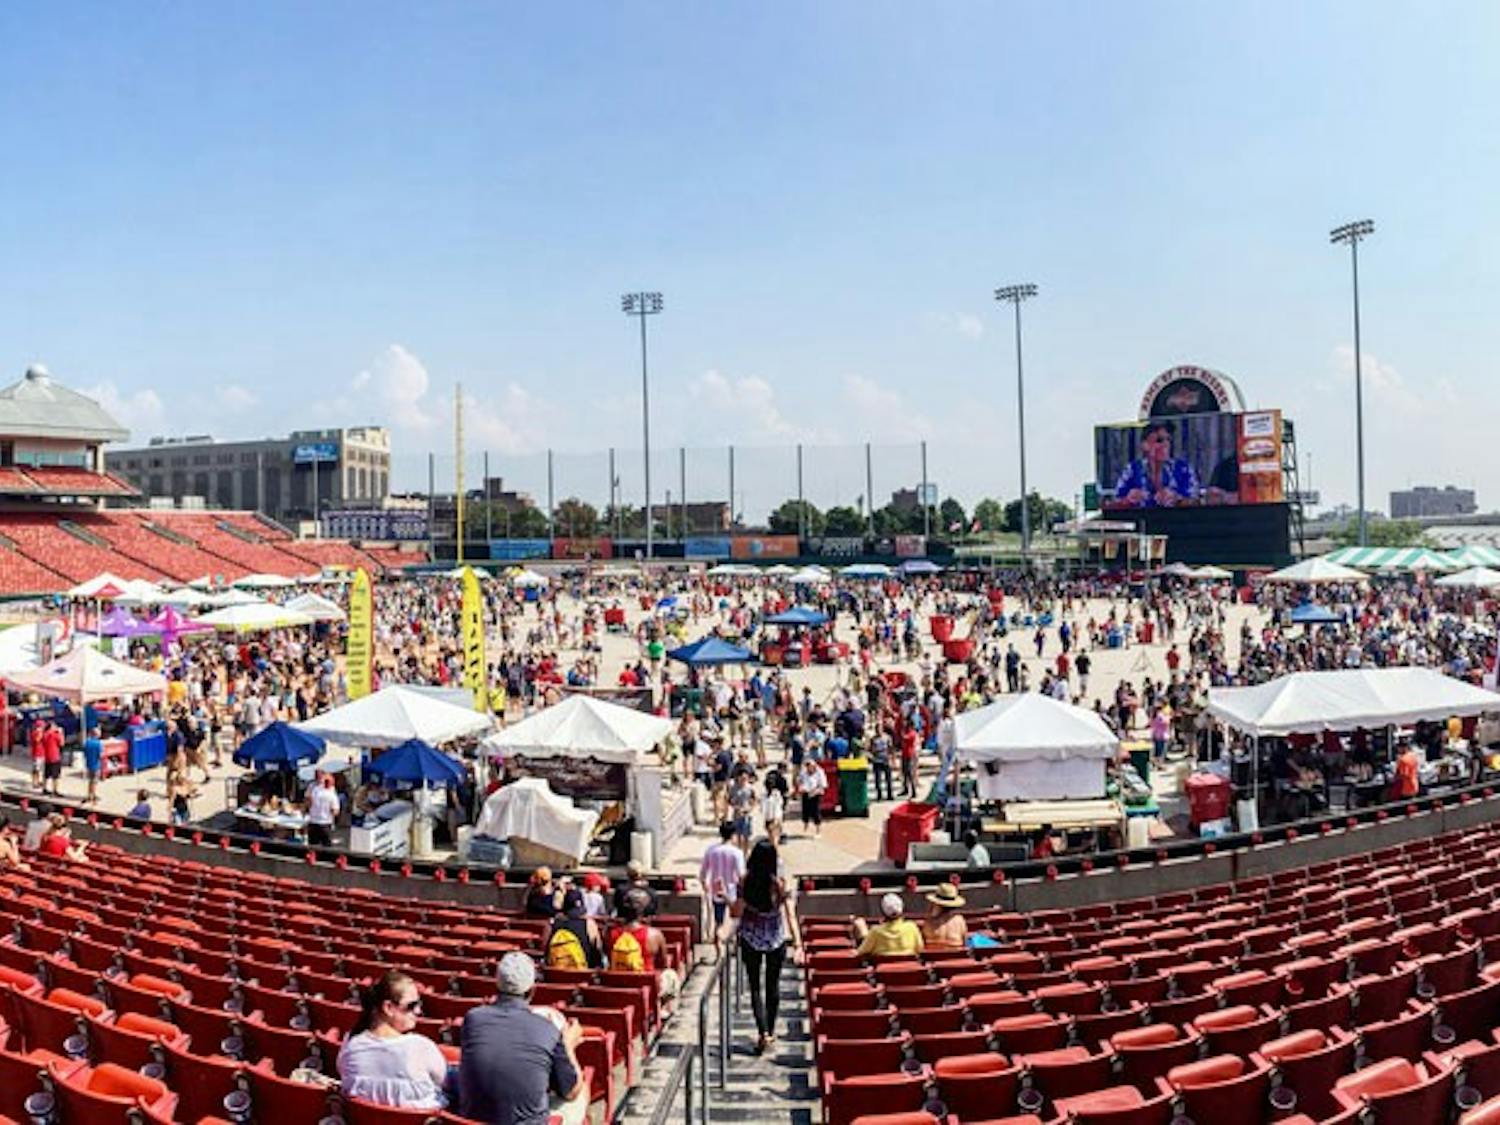 The National Buffalo Chicken Wing Festival was held at Coca Cola Field in downtown Buffalo on Sept. 5 and 6 of&nbsp;2015.